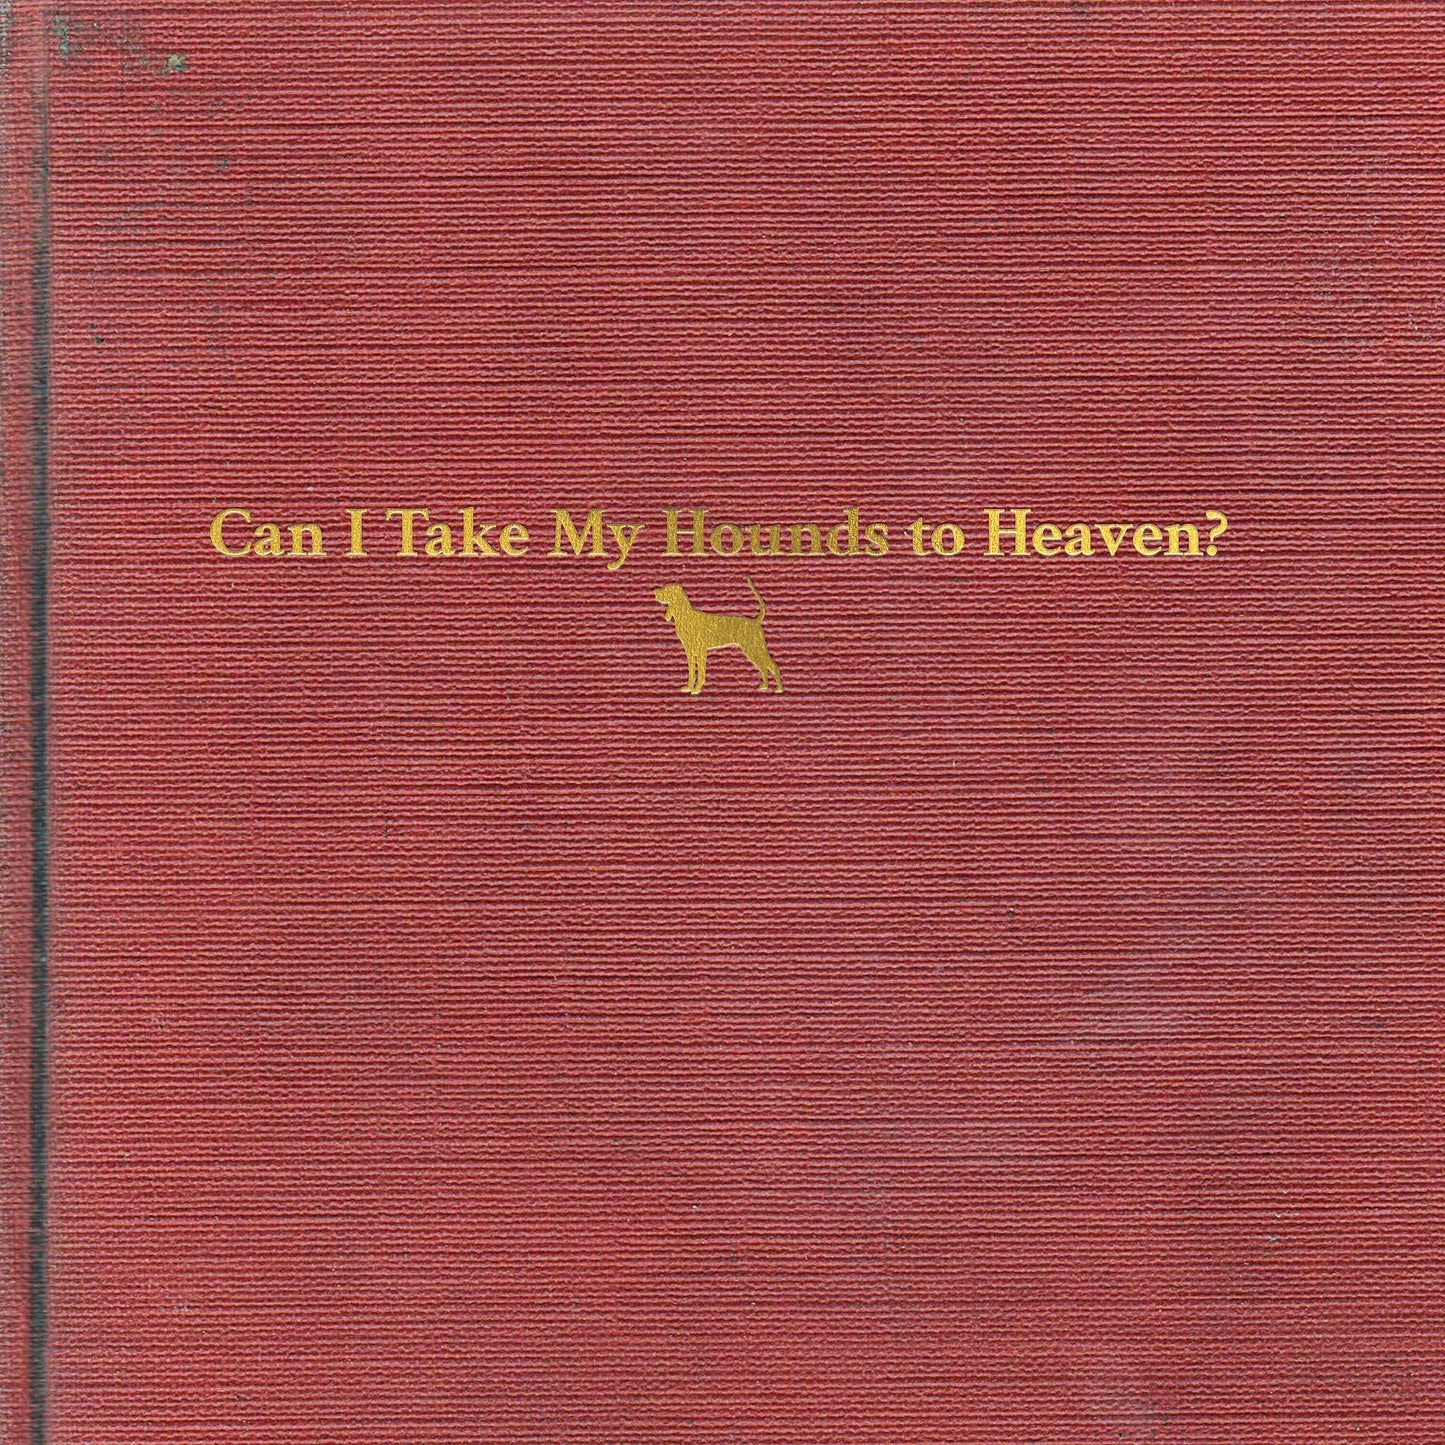 Tyler Childers - Can I Take My Hounds To Heaven? (3 LP) - Joco Records